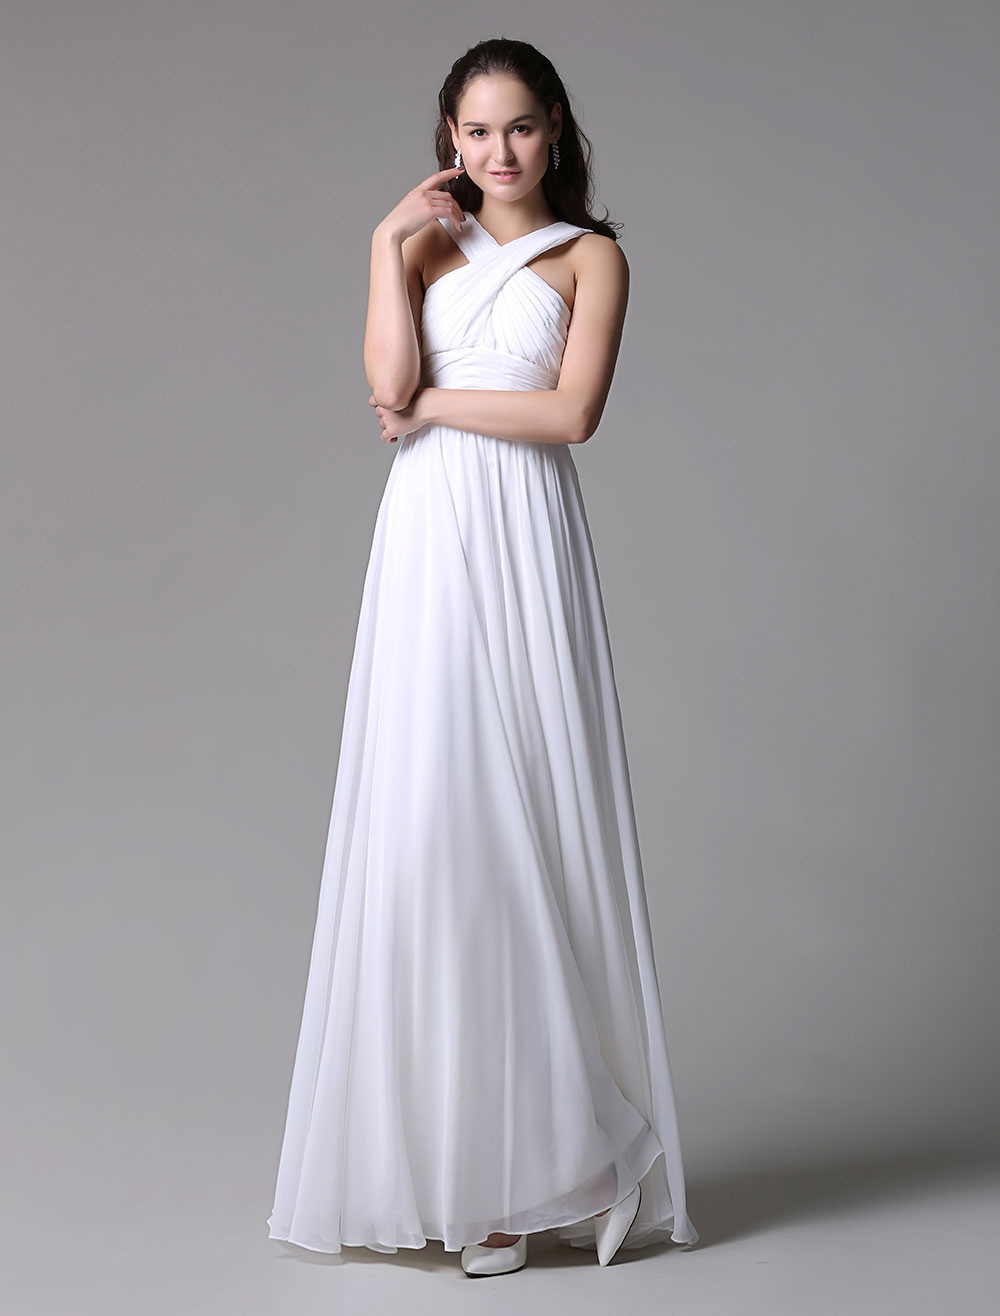 Flirty Ruched Ivory Chiffon Dress with Cross Front and Keyhole Style ...